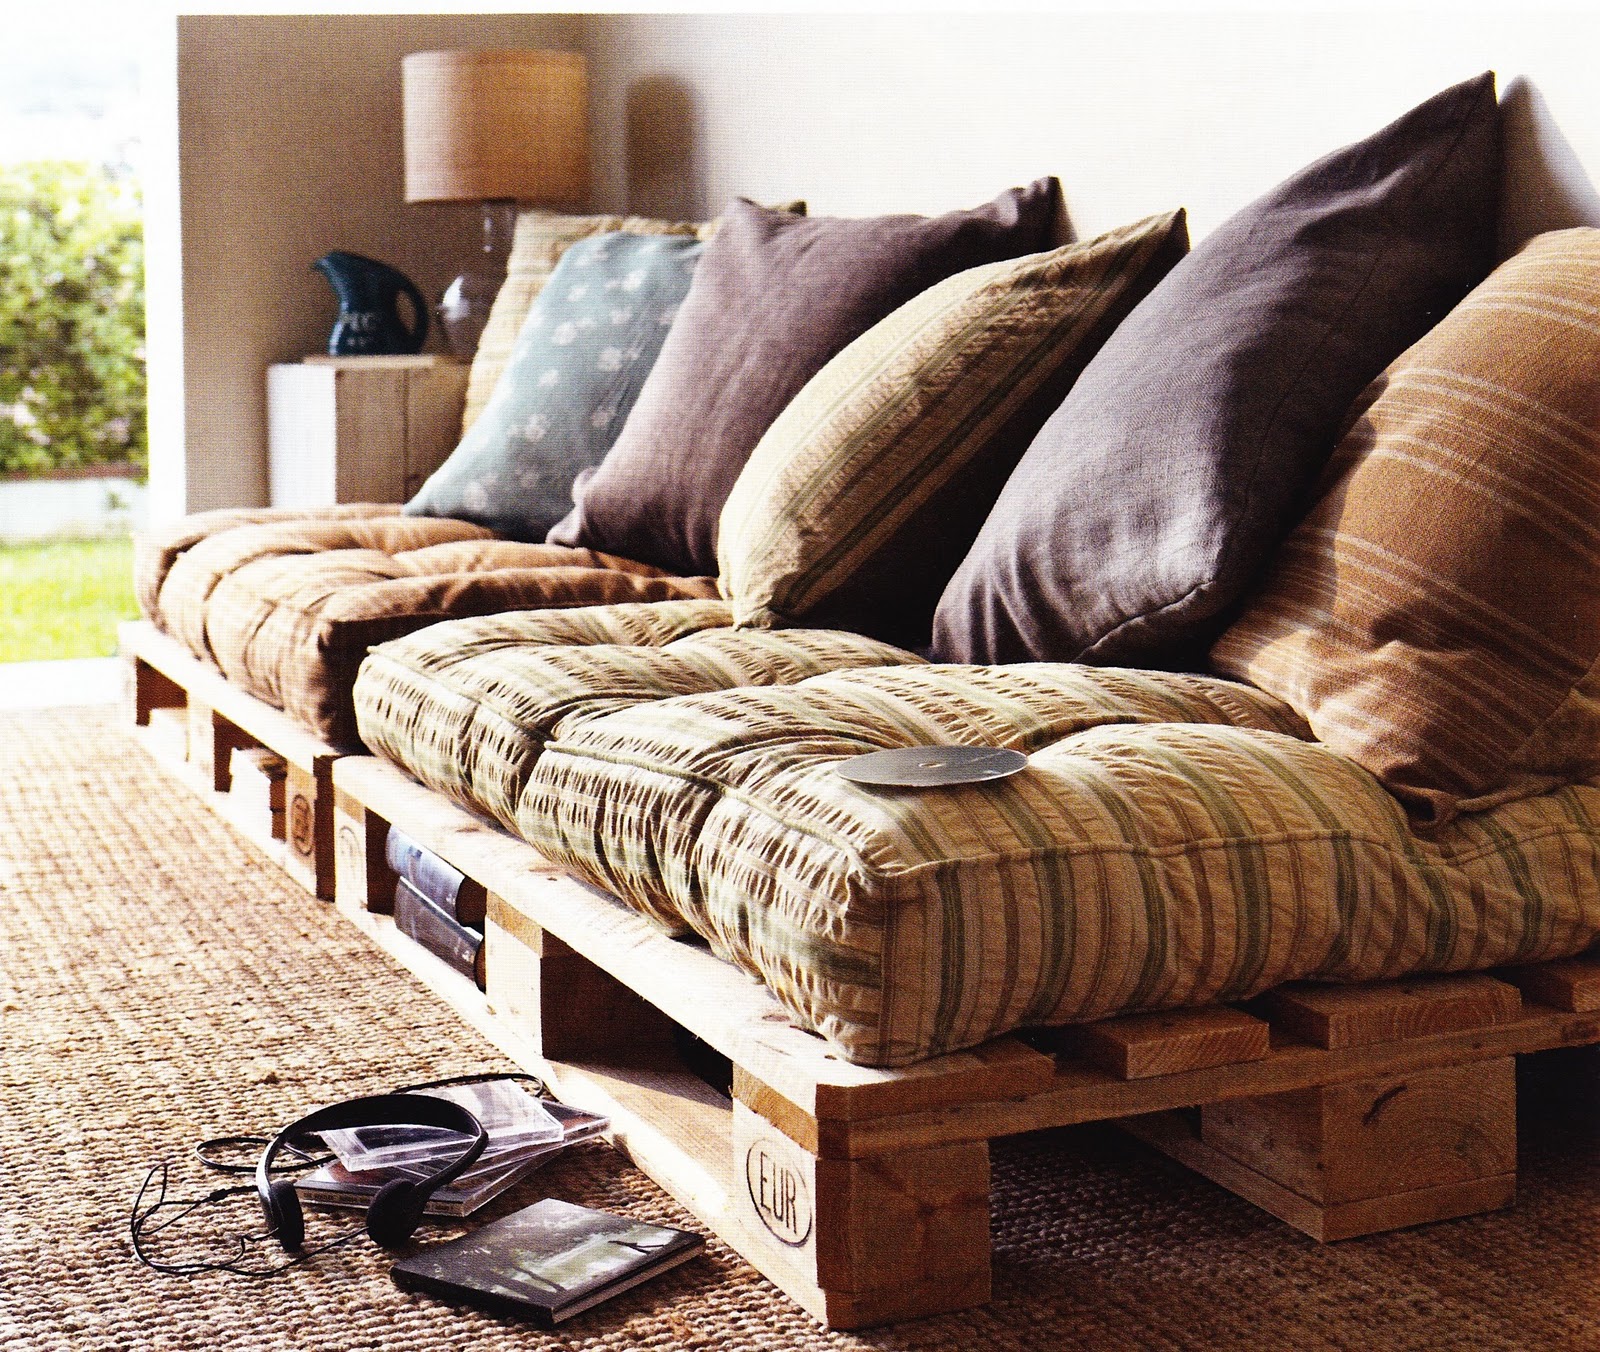 pallet sofa_From frenchbydesign.blogspot.com